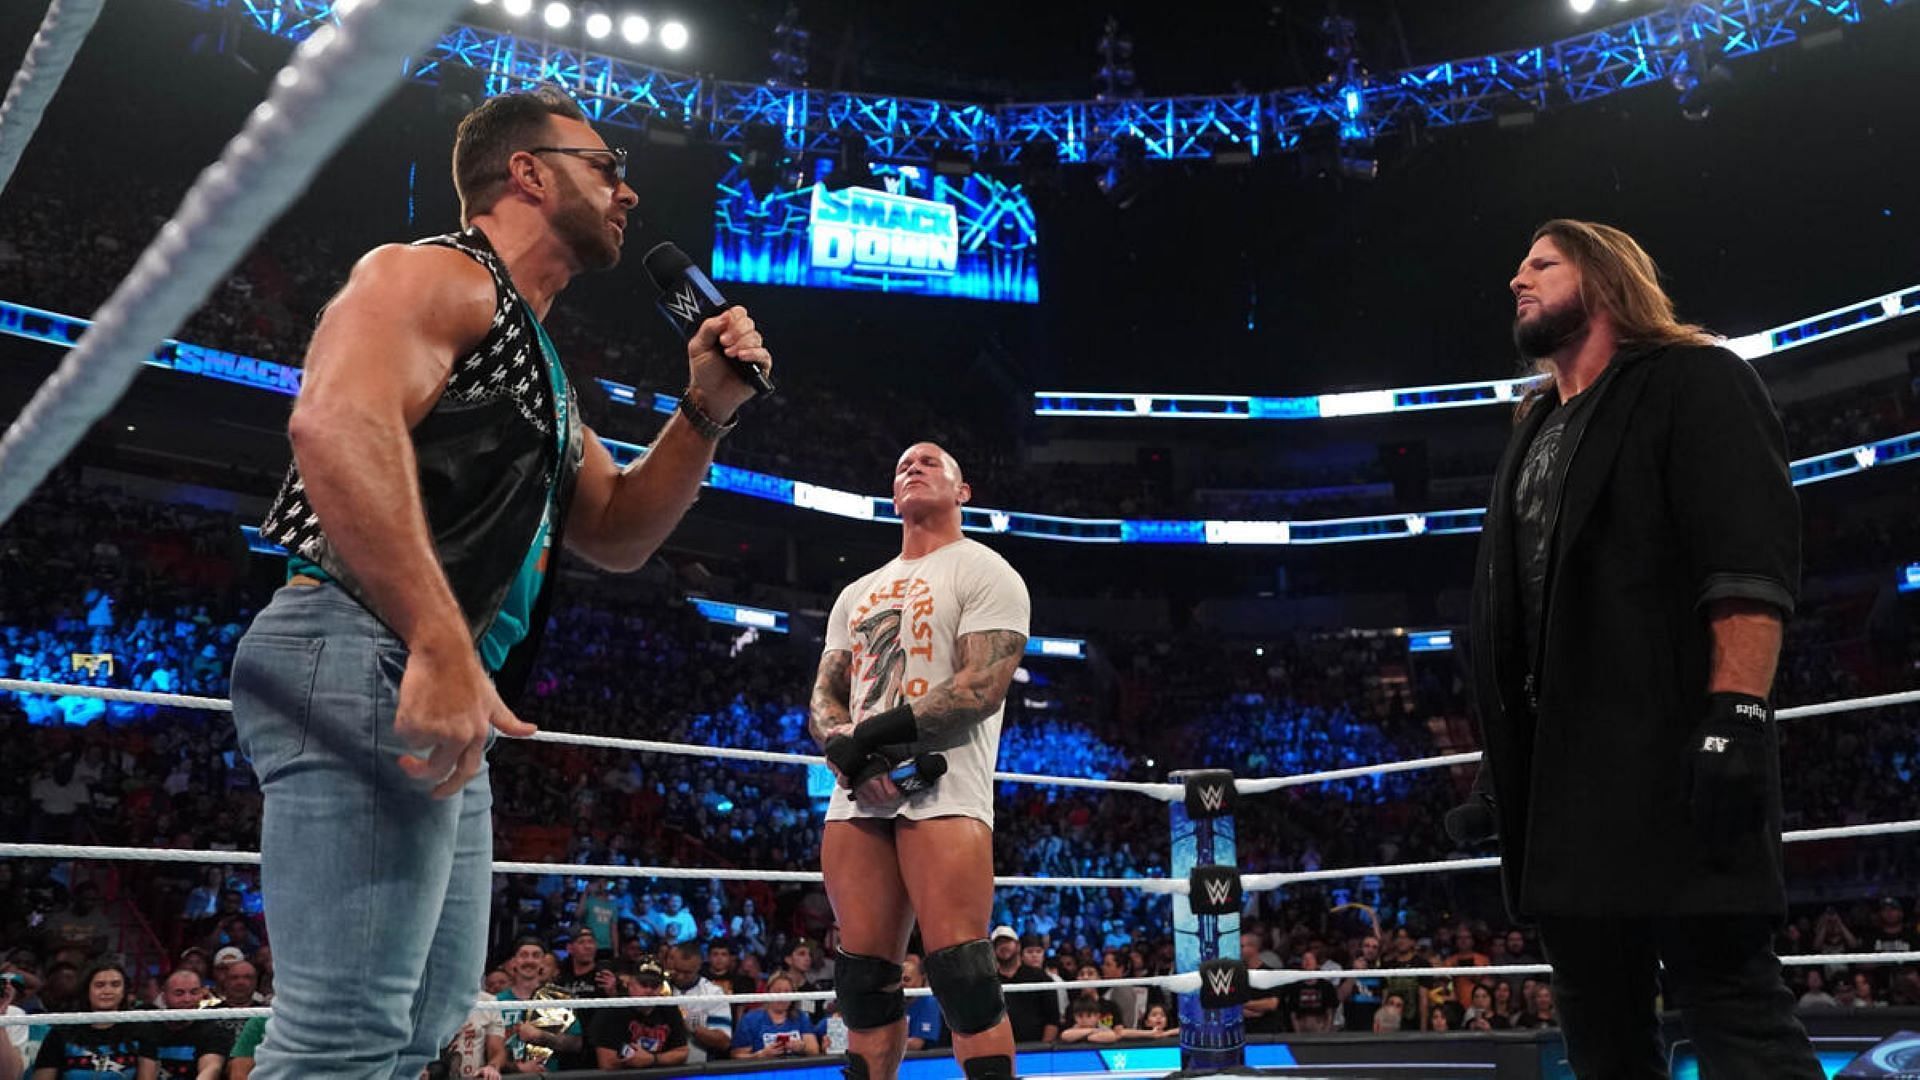 Knight, Orton, and Styles all remained on WWE SmackDown